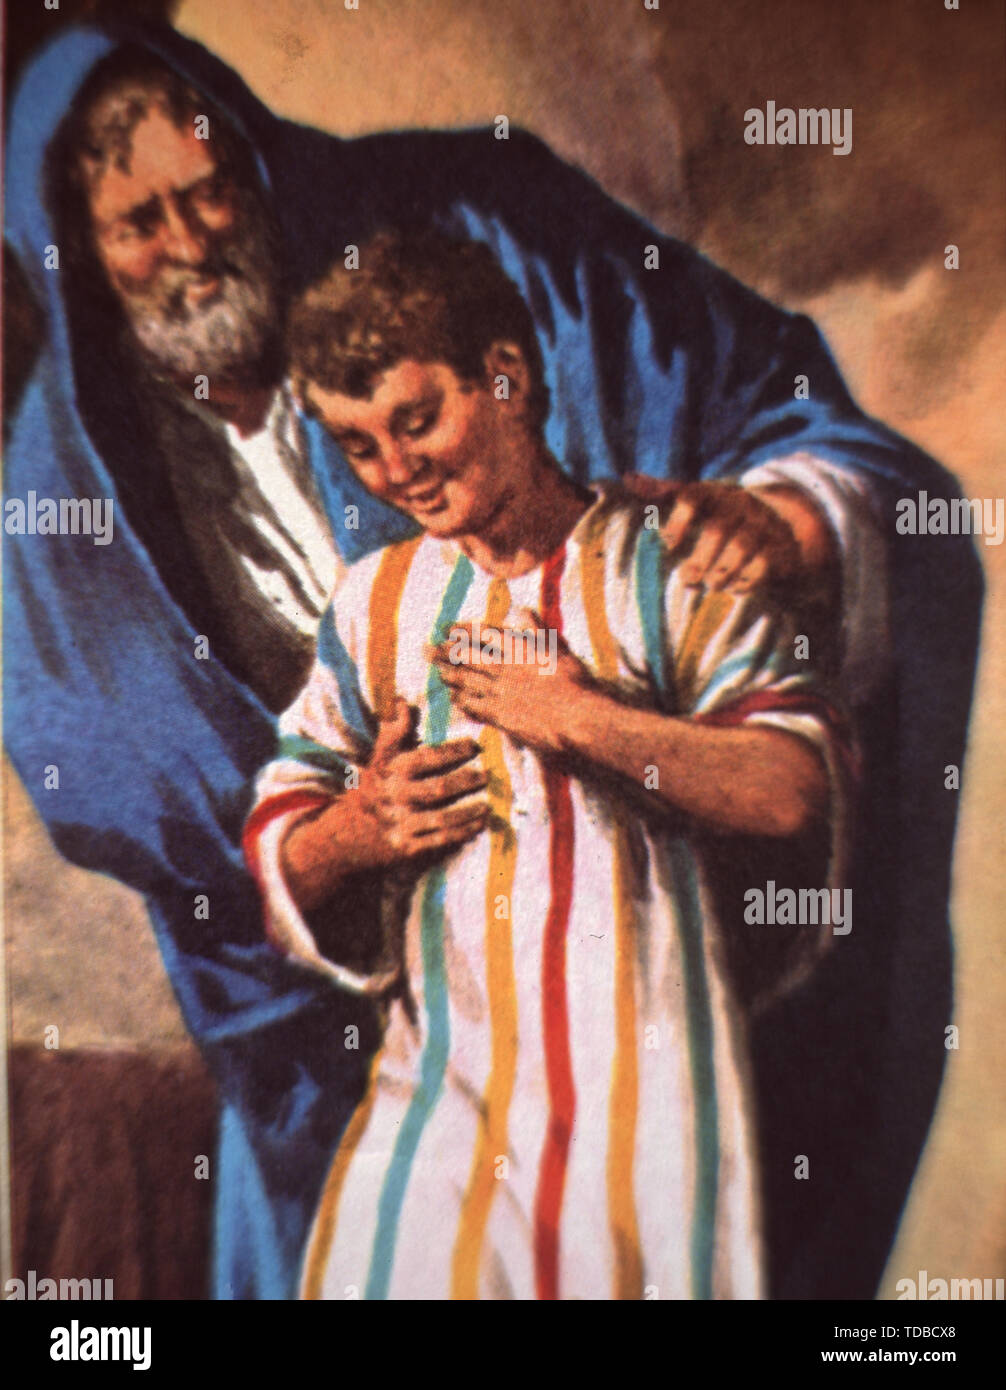 Illustration from the Bible depicting 'Genesis 37:4' Joseph and his coat of many colours. Stock Photo